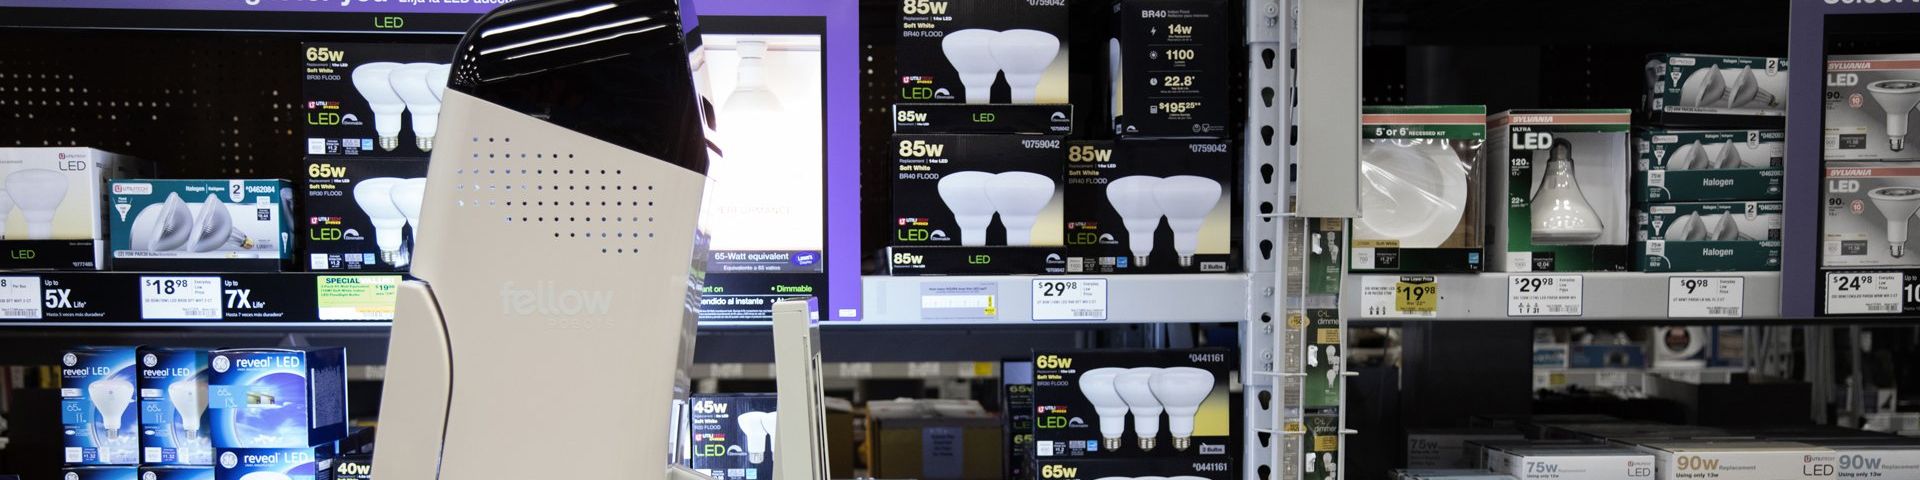 CoBots and snapshots: today’s solution to a billion dollar retail problem